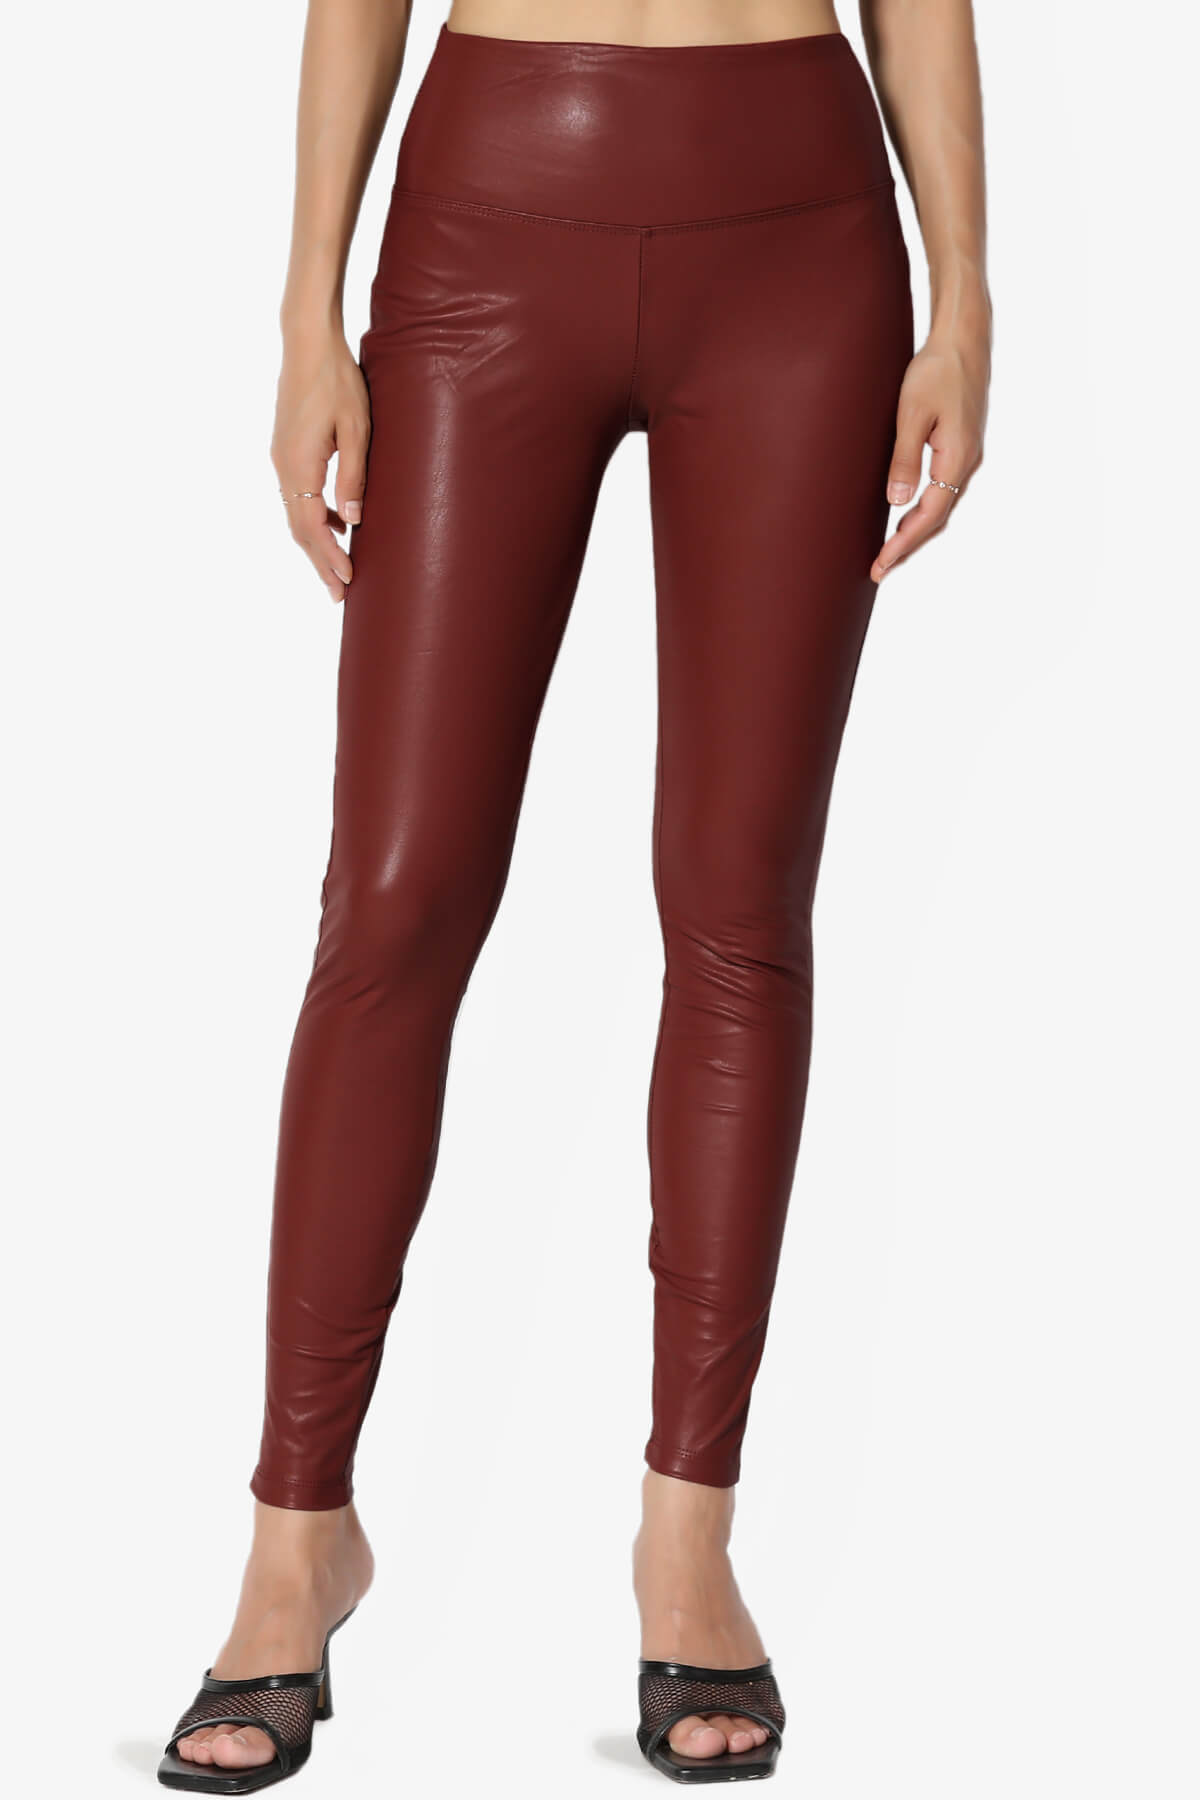 Faux Leather Pants for Women, Sexy High Waisted Tight Butt Lifting